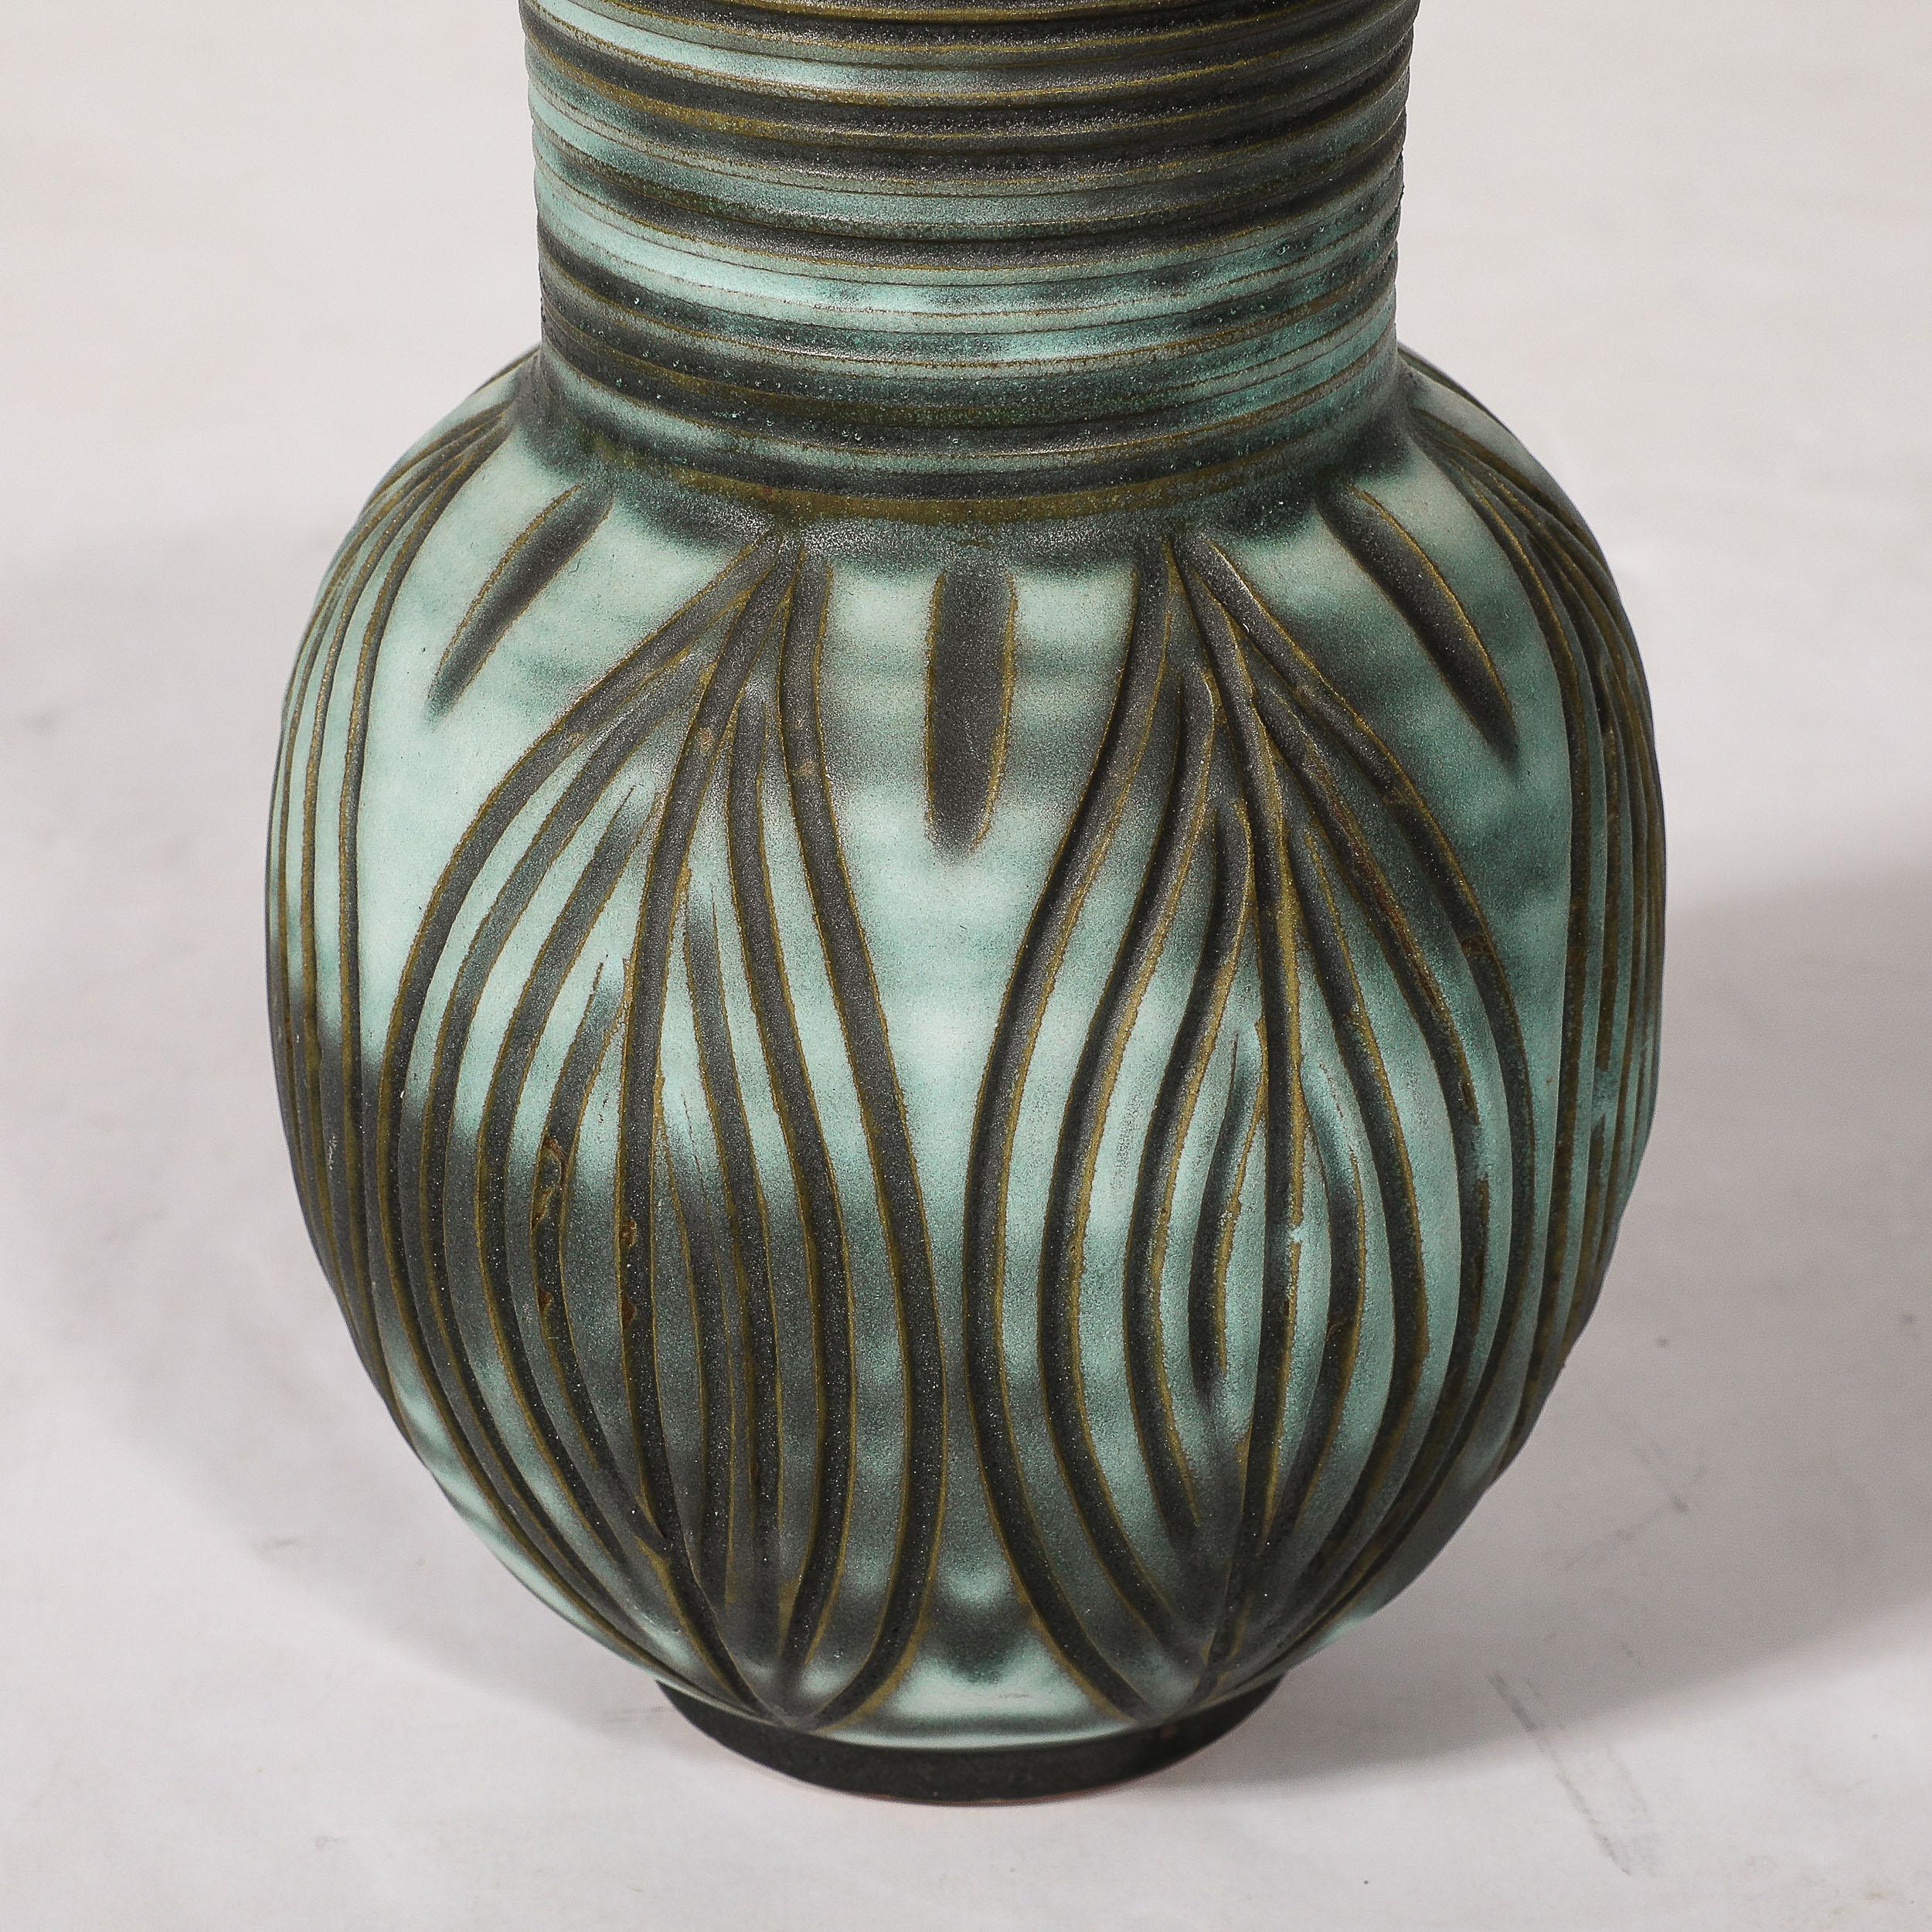 Ceramic Mid-Century Modernist Linear Grooved Teal/Smoked Umber Vase by Design Techniques For Sale